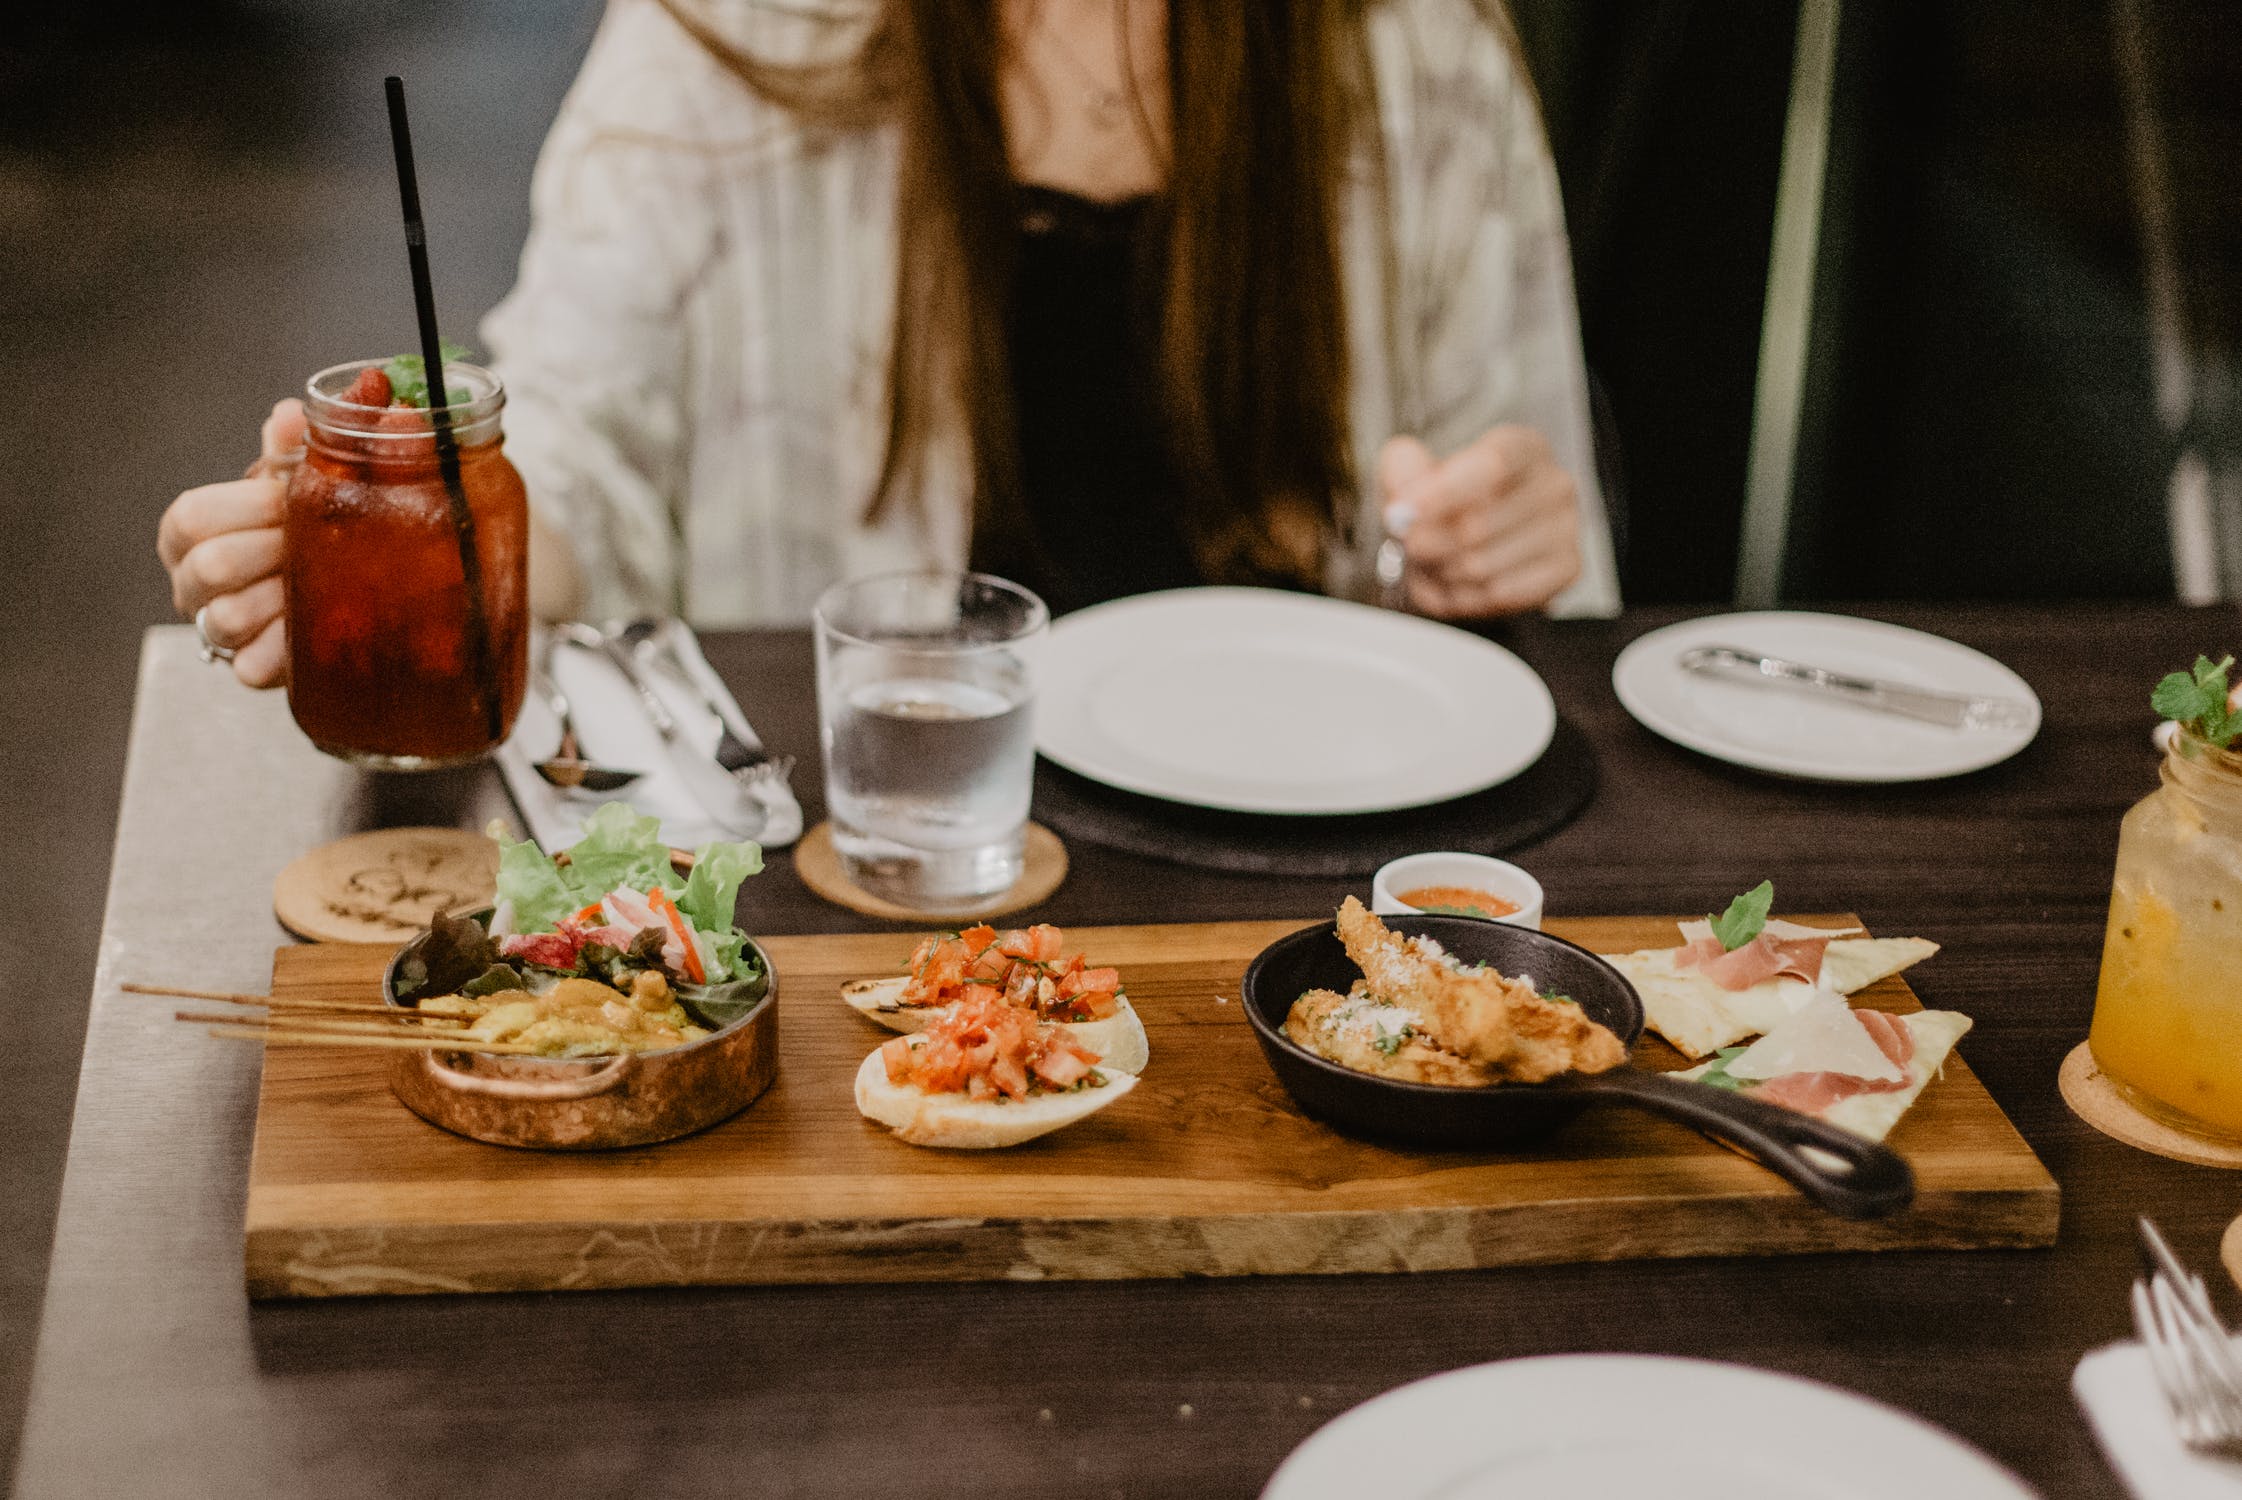 Carmen refused to eat any of the wonderful starters Mrs. Ulrich had made | Source: Pexels